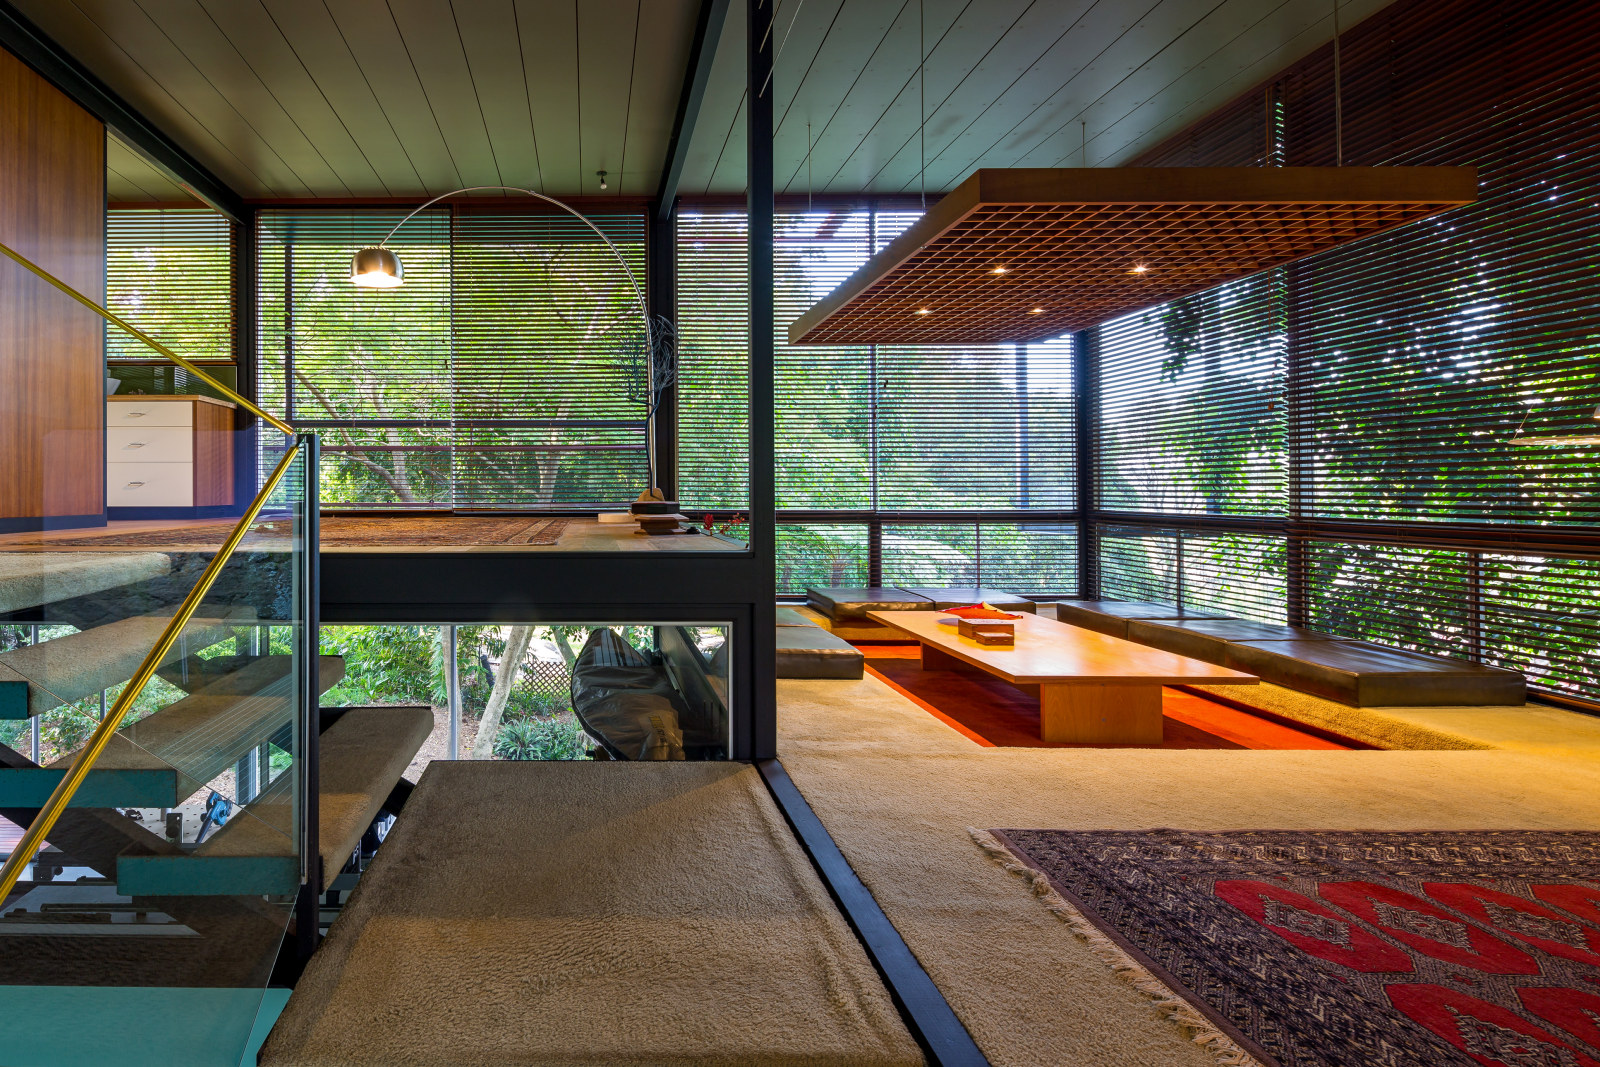 Photo looking across the interior of a modernist house. A stair can be seen and a sunken dining area.